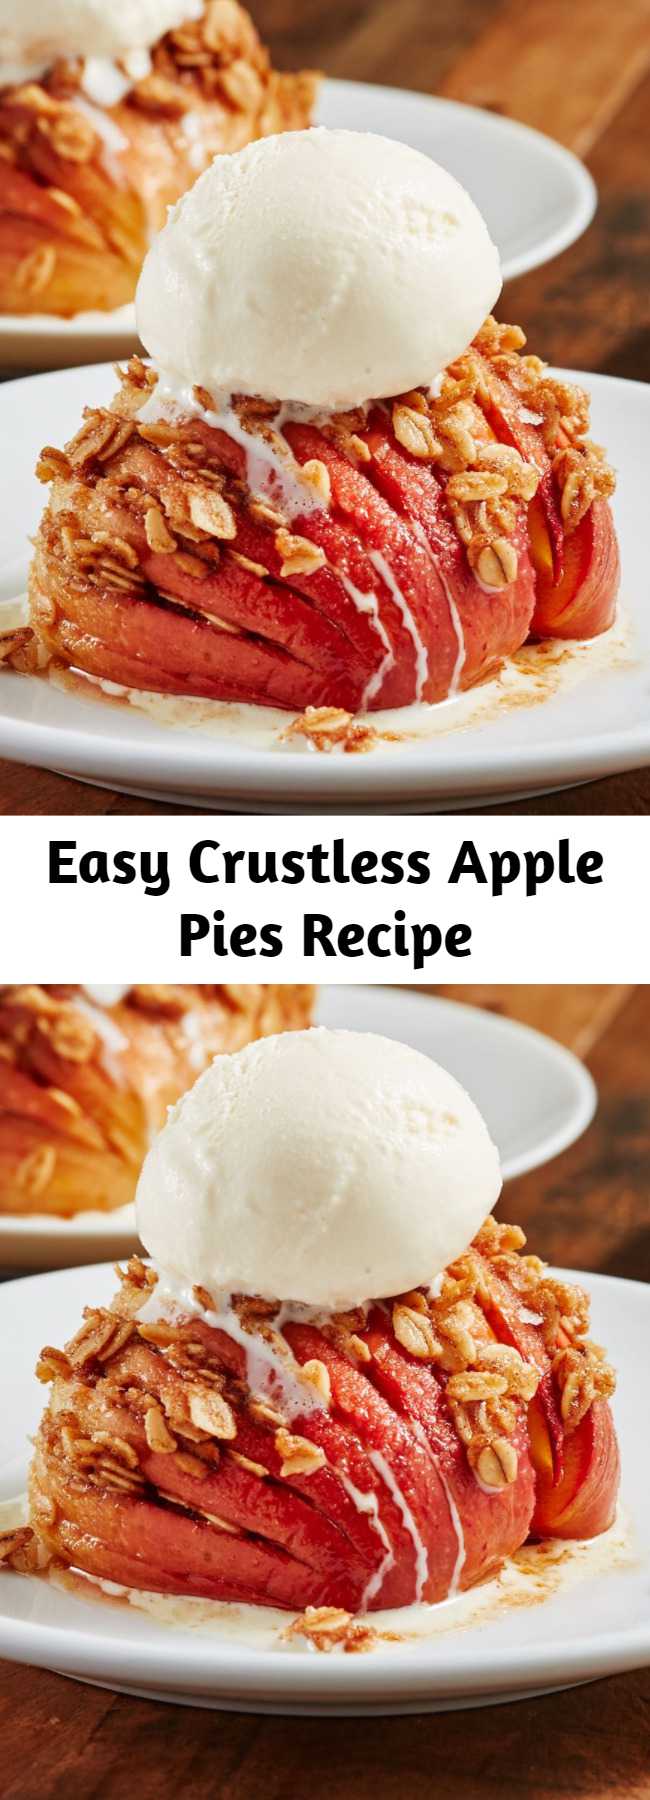 Easy Crustless Apple Pies Recipe - Hasselback apples are the easy fall dessert idea you need to try ASAP. It's a low-carb recipe that doesn't taste like it. The best part: You don't need to deal with rolling out and chilling pie dough. #easyrecipes #easydessert #healthydessert #lowcarbdessert #applerecipes #dessert #applepie #healthyapple